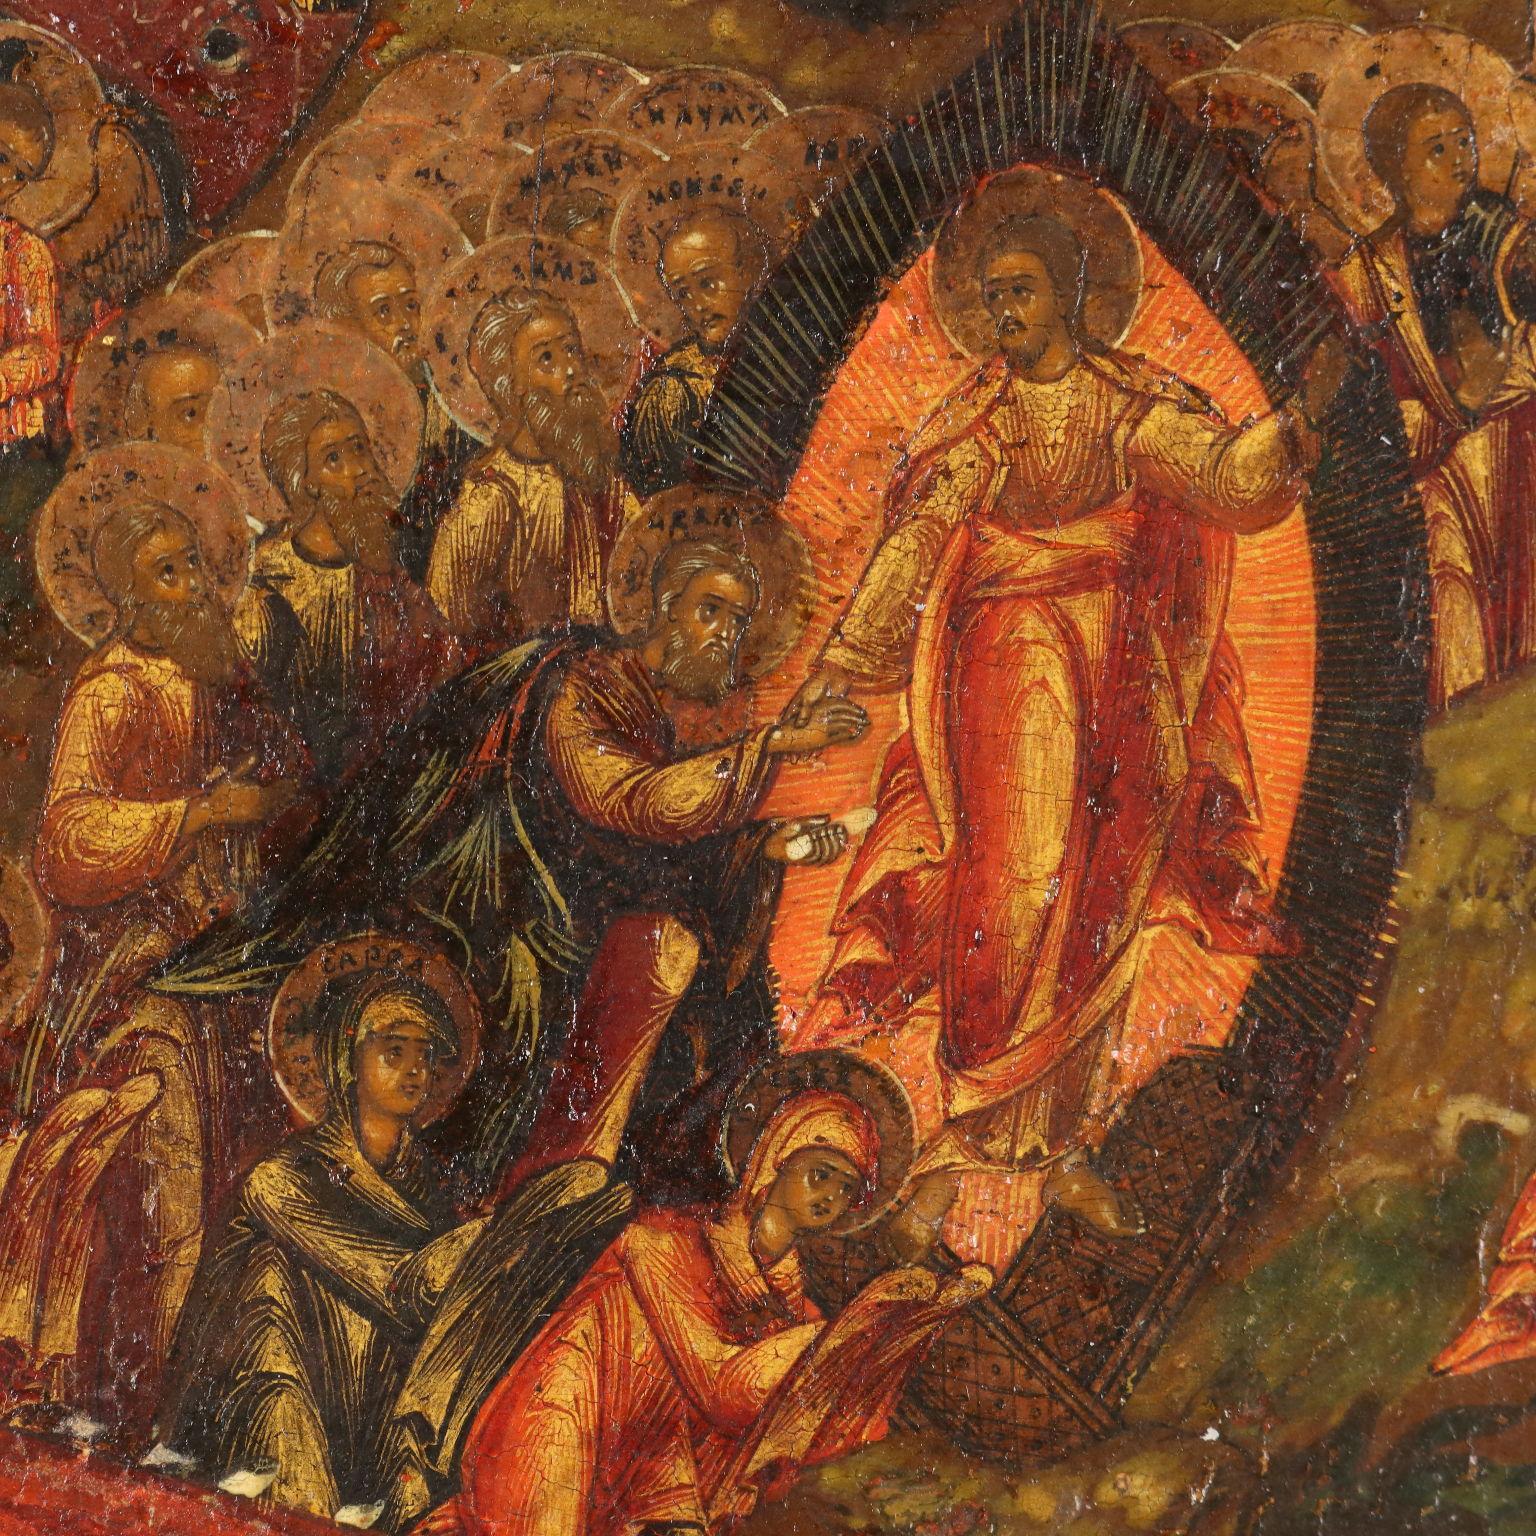 Tempera on wood. The icon traces the festivities of the Orthodox liturgical calendar, with the sixteen accompanying scenes which, starting from the birth of the Virgin Mary, recount evangelical episodes from the life of Jesus, culminating in his